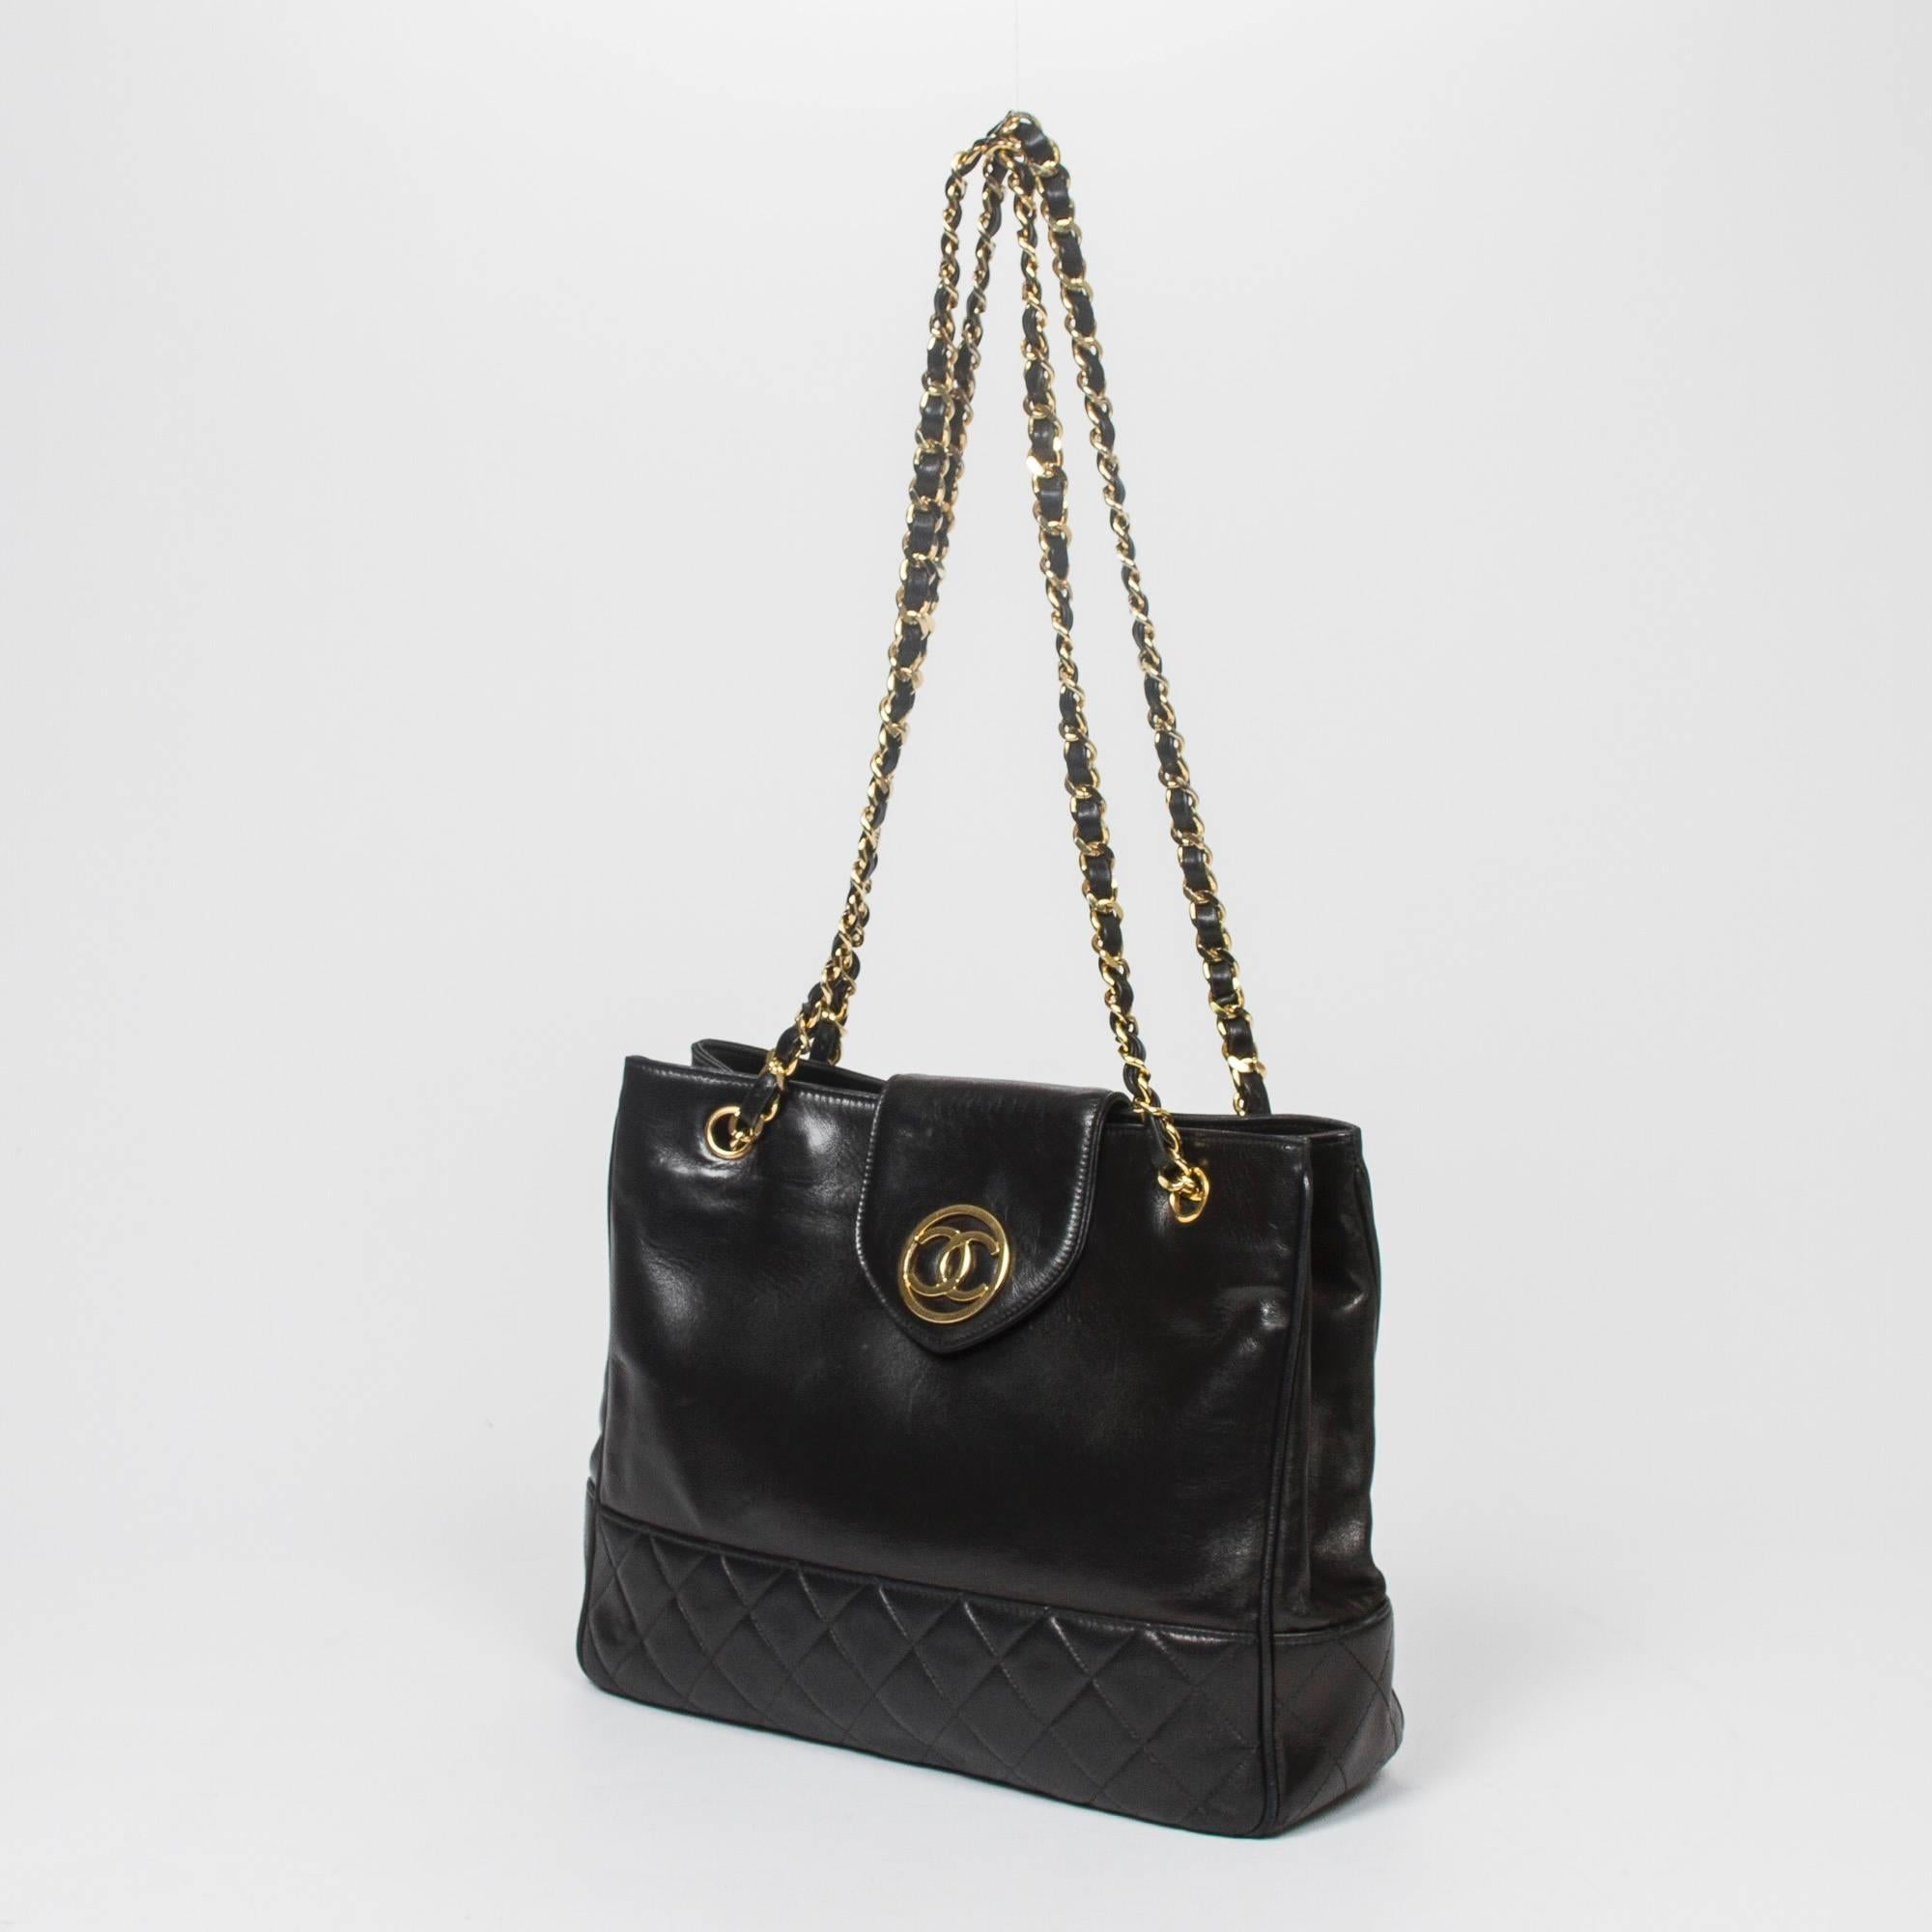 Vintage Tote shoulder bag in black leather with quilted base, chain straps interlaced with leather and gold tone hardware. Magnetic closures. Black leatherette lined interior with 2 zip pockets. 